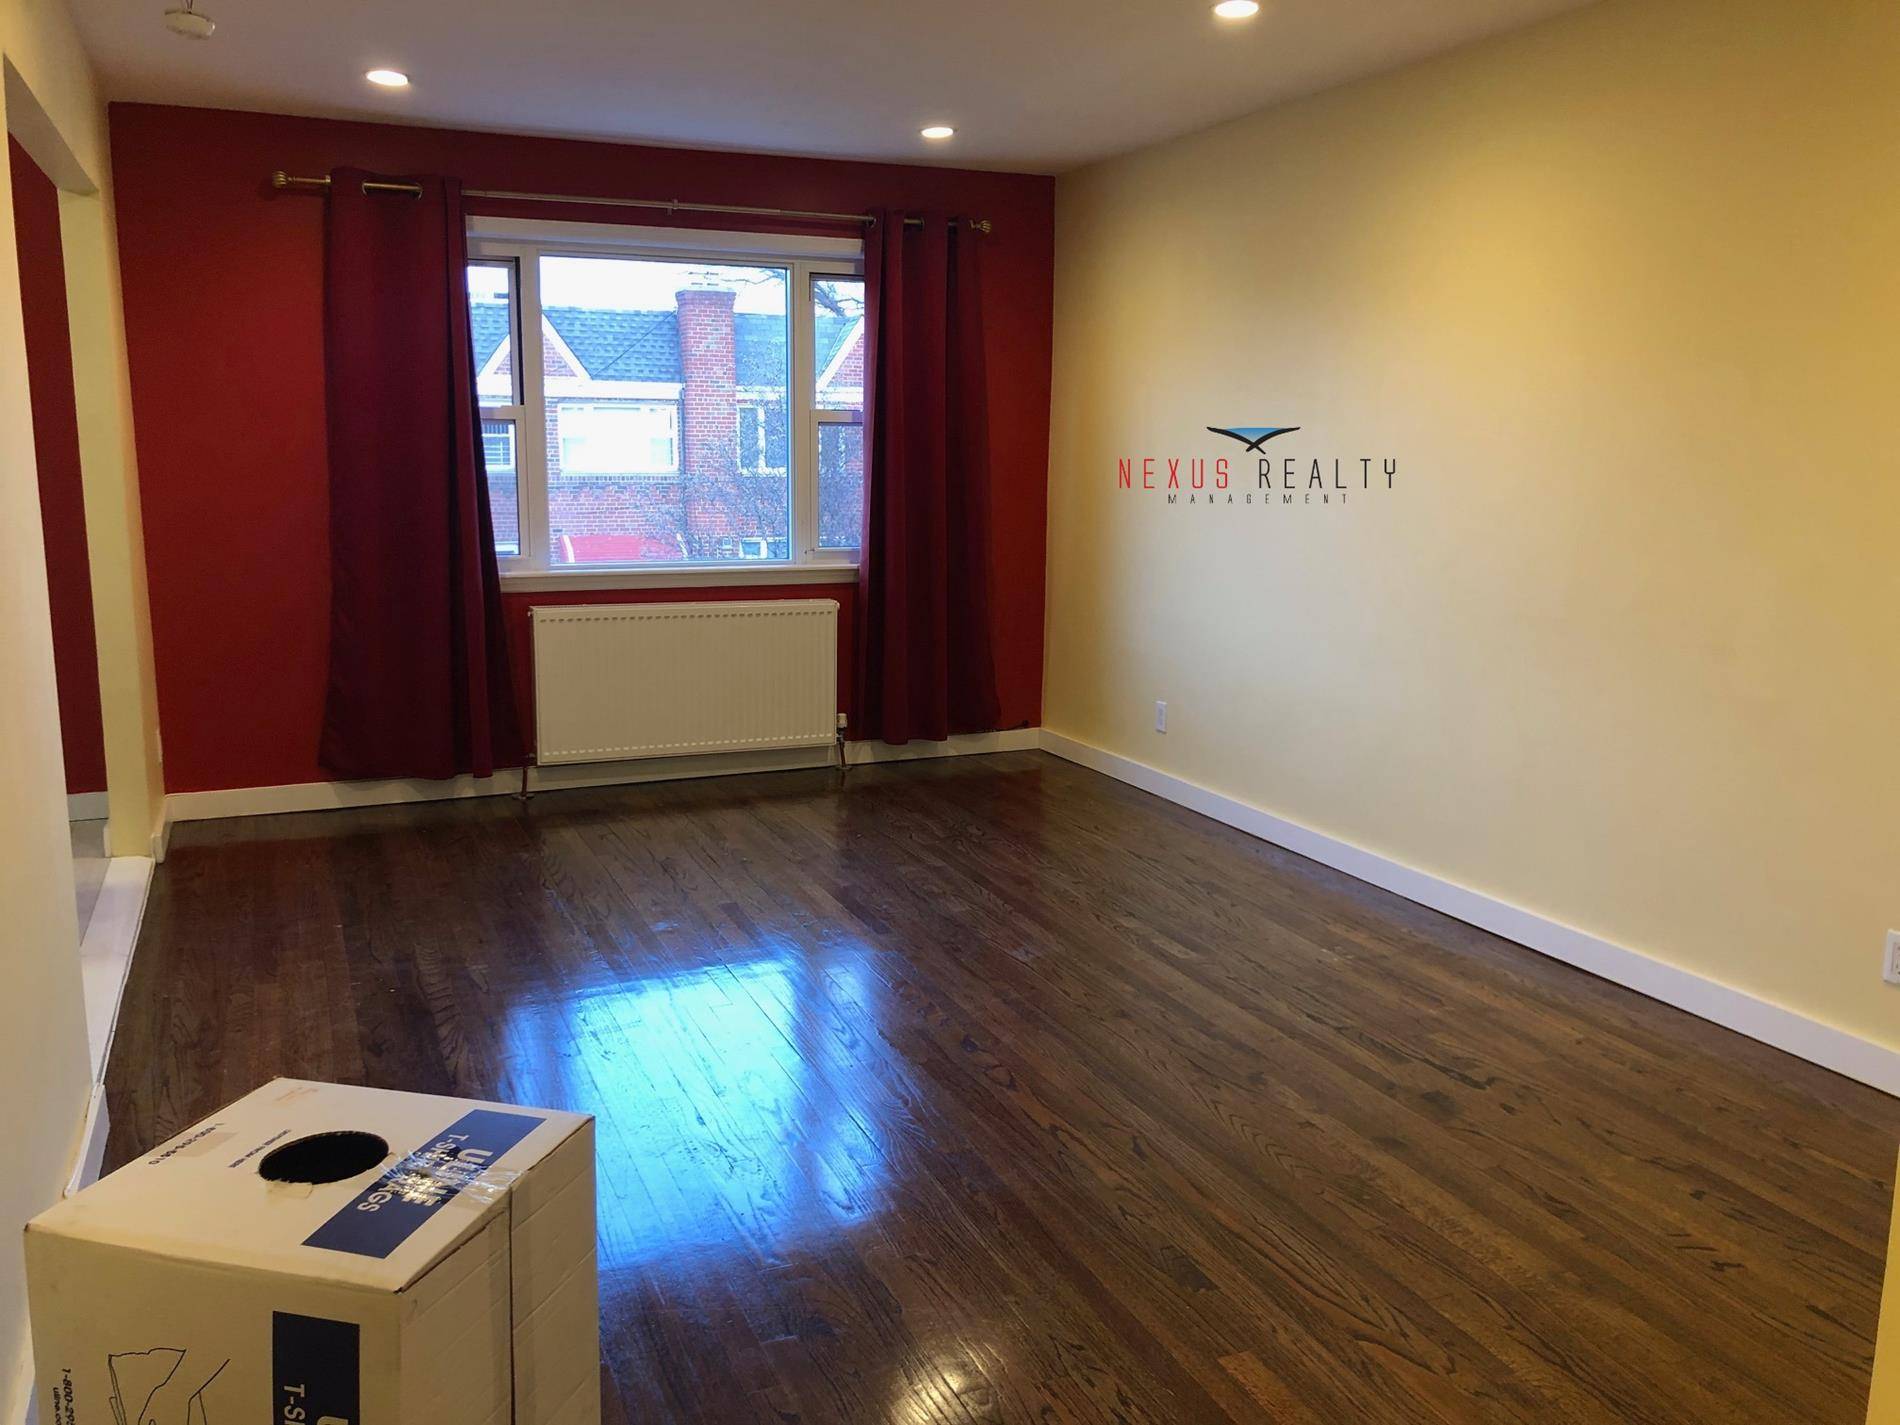 Amazing updated 2 Bedroom apartment in Upper Ditmars 26001 King size and 1 queen size bedroom on the top floor 3rd in 3 family houseRenovated eat in kitchen with stainless ...